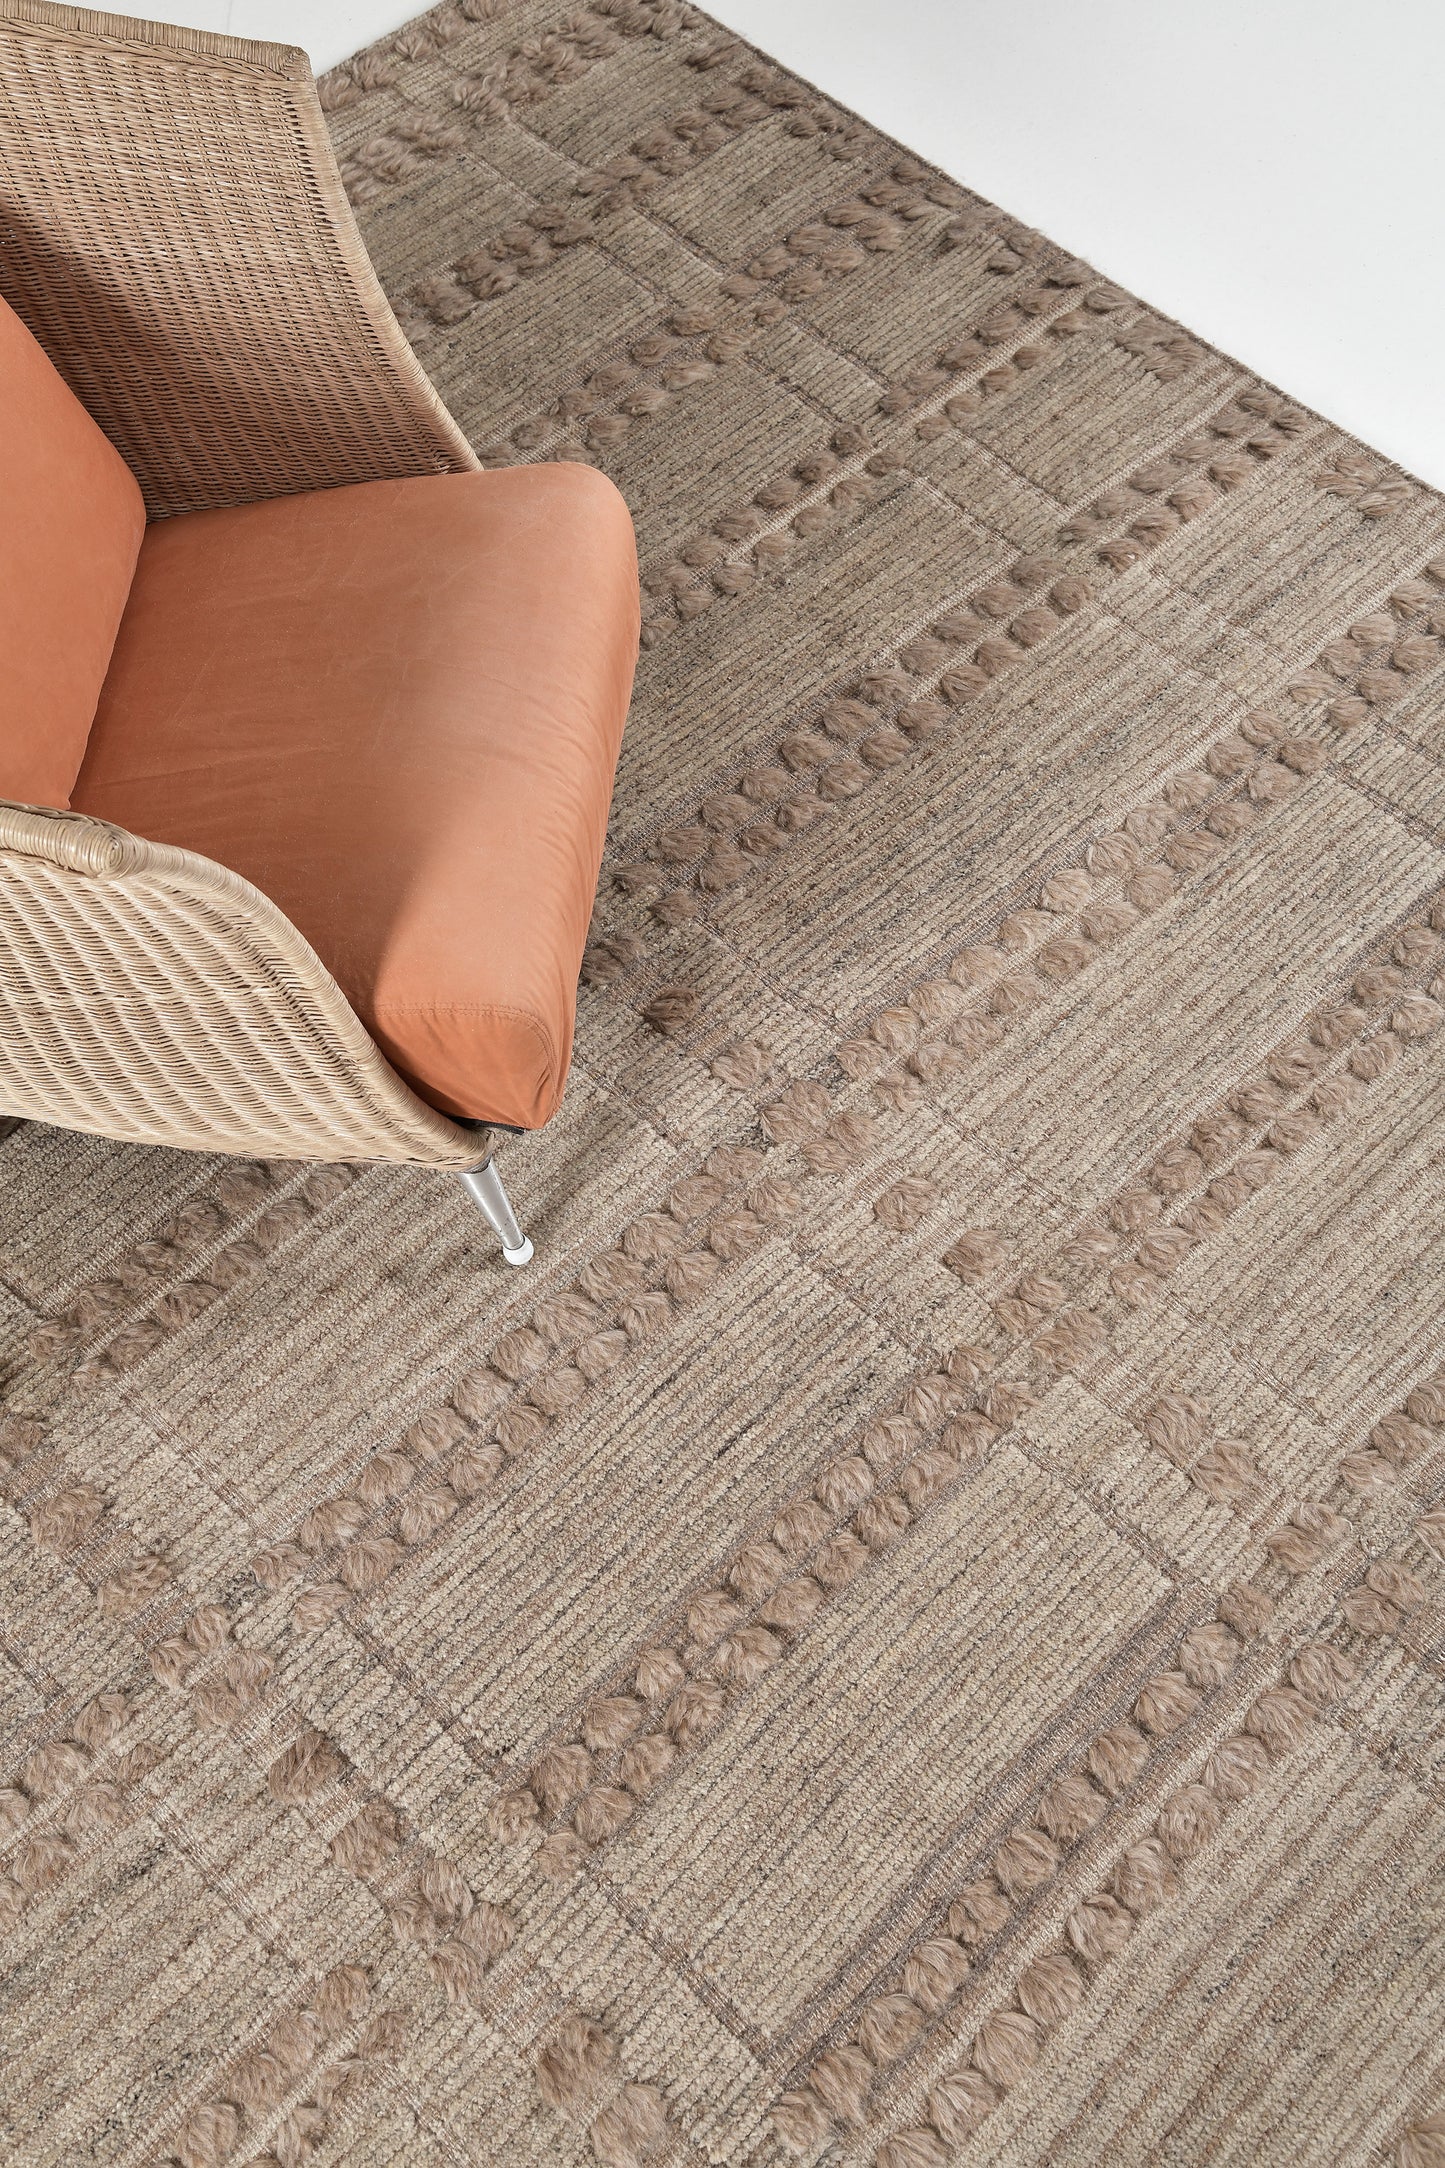 Modern Rug Contour by Claudia Afshar Image3